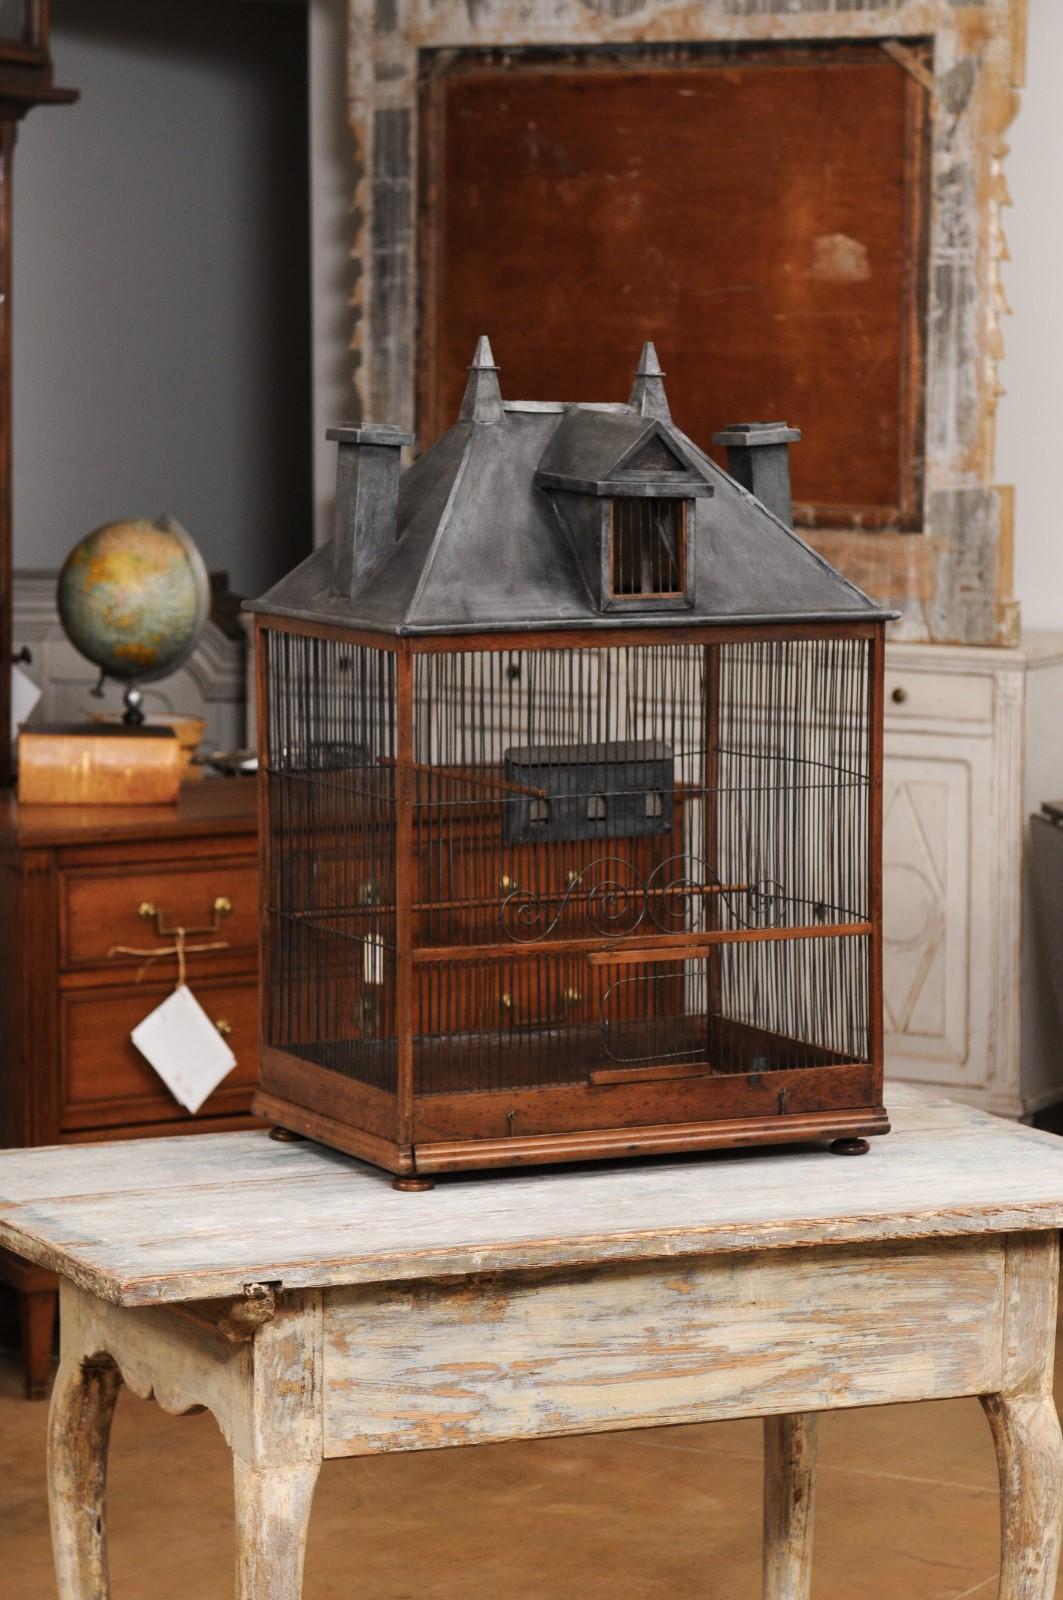 A French Restauration period rustic bird cage from the early 19th century, with tin slanted roof and chimneys. Created in France during the second quarter of the 19th century, this bird cage charms us with its rustic character and lovely décor.